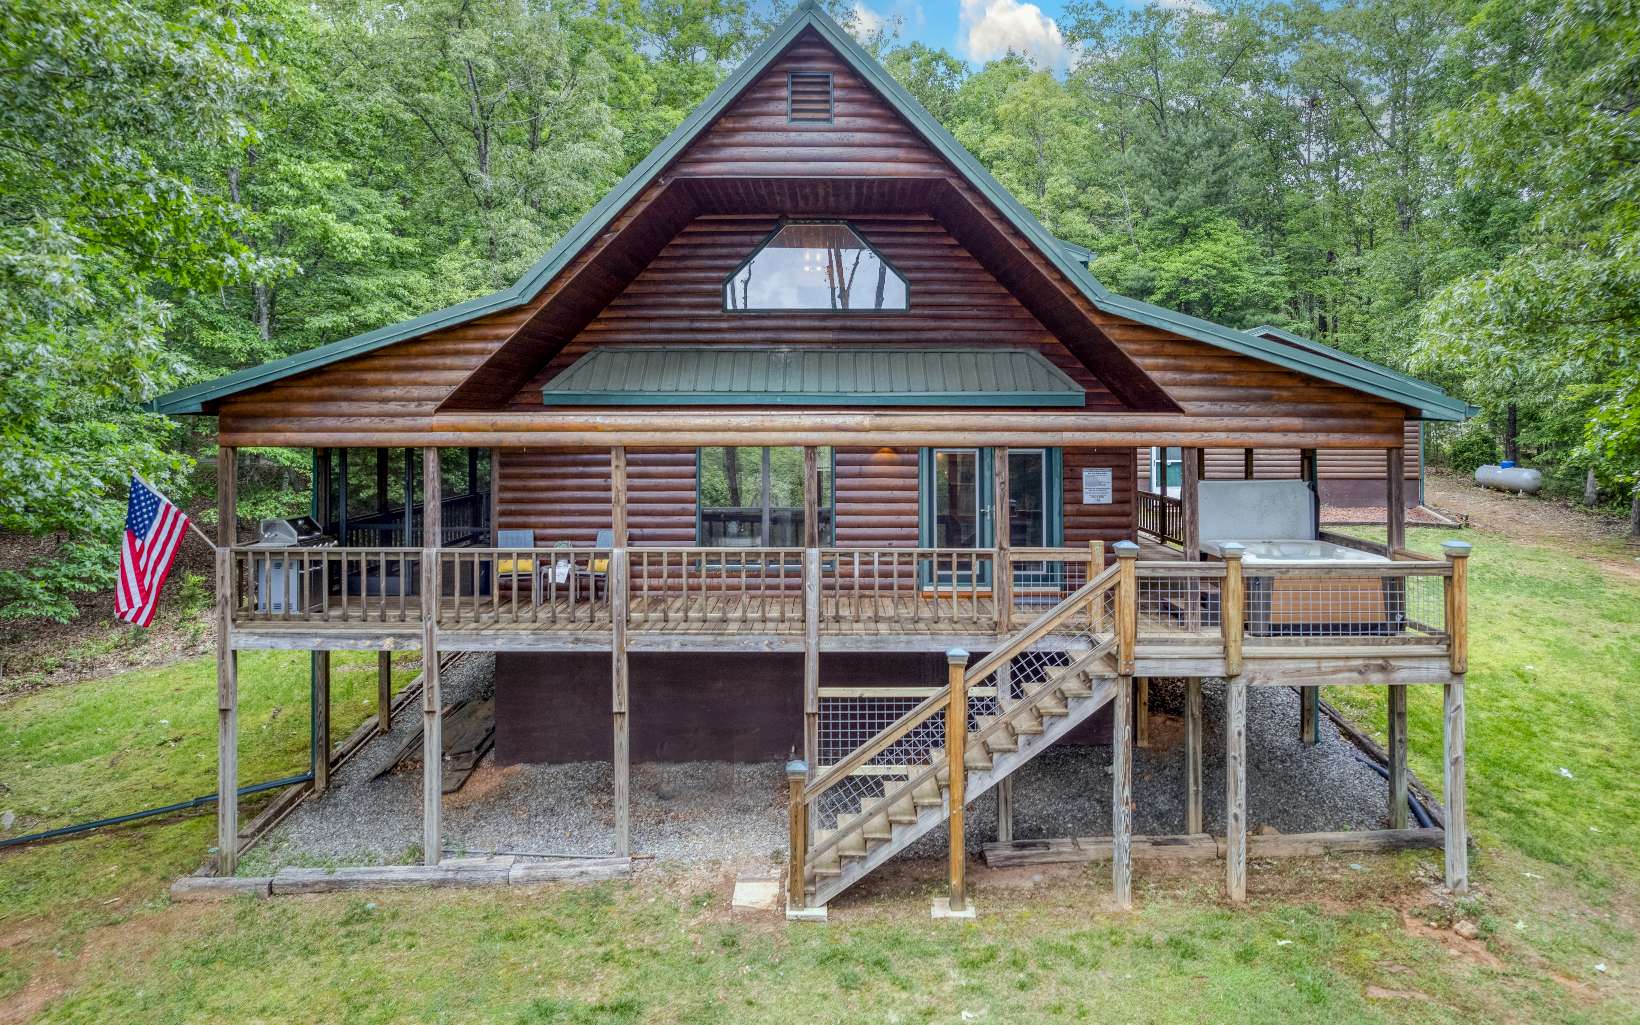 This fully furnished cabin is as cozy as it can get in the woods and comes with an impeccable view, 3 large private bedrooms, 2 full baths with beautiful showers and a soaking tub!! 2 bedrooms have brand new 42" smart tvs already mounted. Enjoy entertaining in one of the many luxurious spaces this home has to offer. Get the vacation started on the deck while relaxing in the bed swing or hot tub overlooking the views! Relax with a refreshing beverage from the fridge in the chef's huge kitchen with tons of storage, beautiful granite, and subway tile while staying warm out by the fire-pit! New paint throughout the home as well as an added on cell phone service booster and a Generac generator that can power the whole house. When it's time to unwind this is the perfect place to be. Park in your oversized, detached workshop/garage or on the HUGE circular driveway. Haven @ Thomas Mountain is privately tucked 10 minutes away from Tank Town and 15-20 minutes away from the sought after Lake Blue Ridge Marina and Aska Adventure Area!